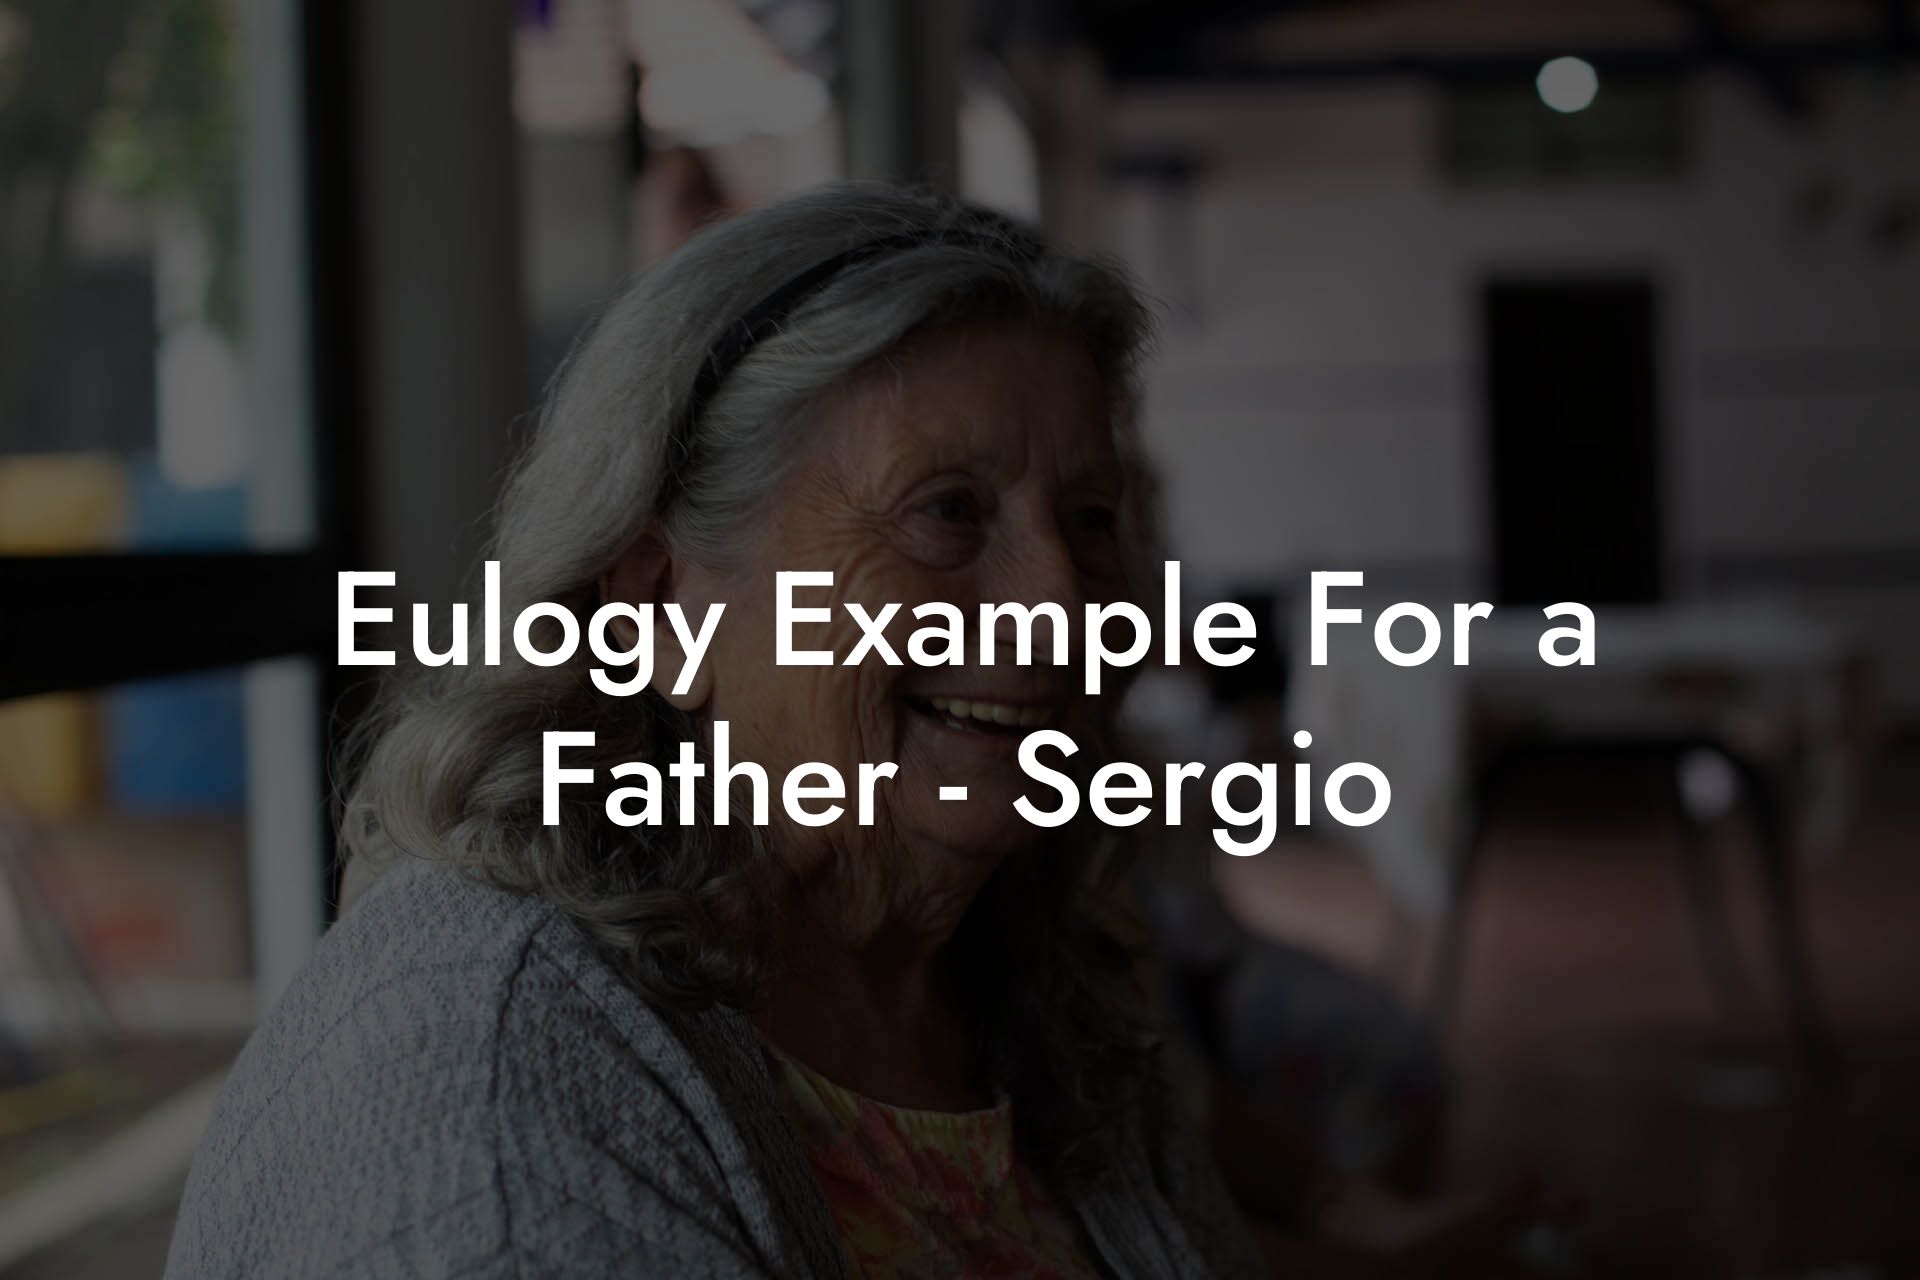 Eulogy Example For a Father - Sergio